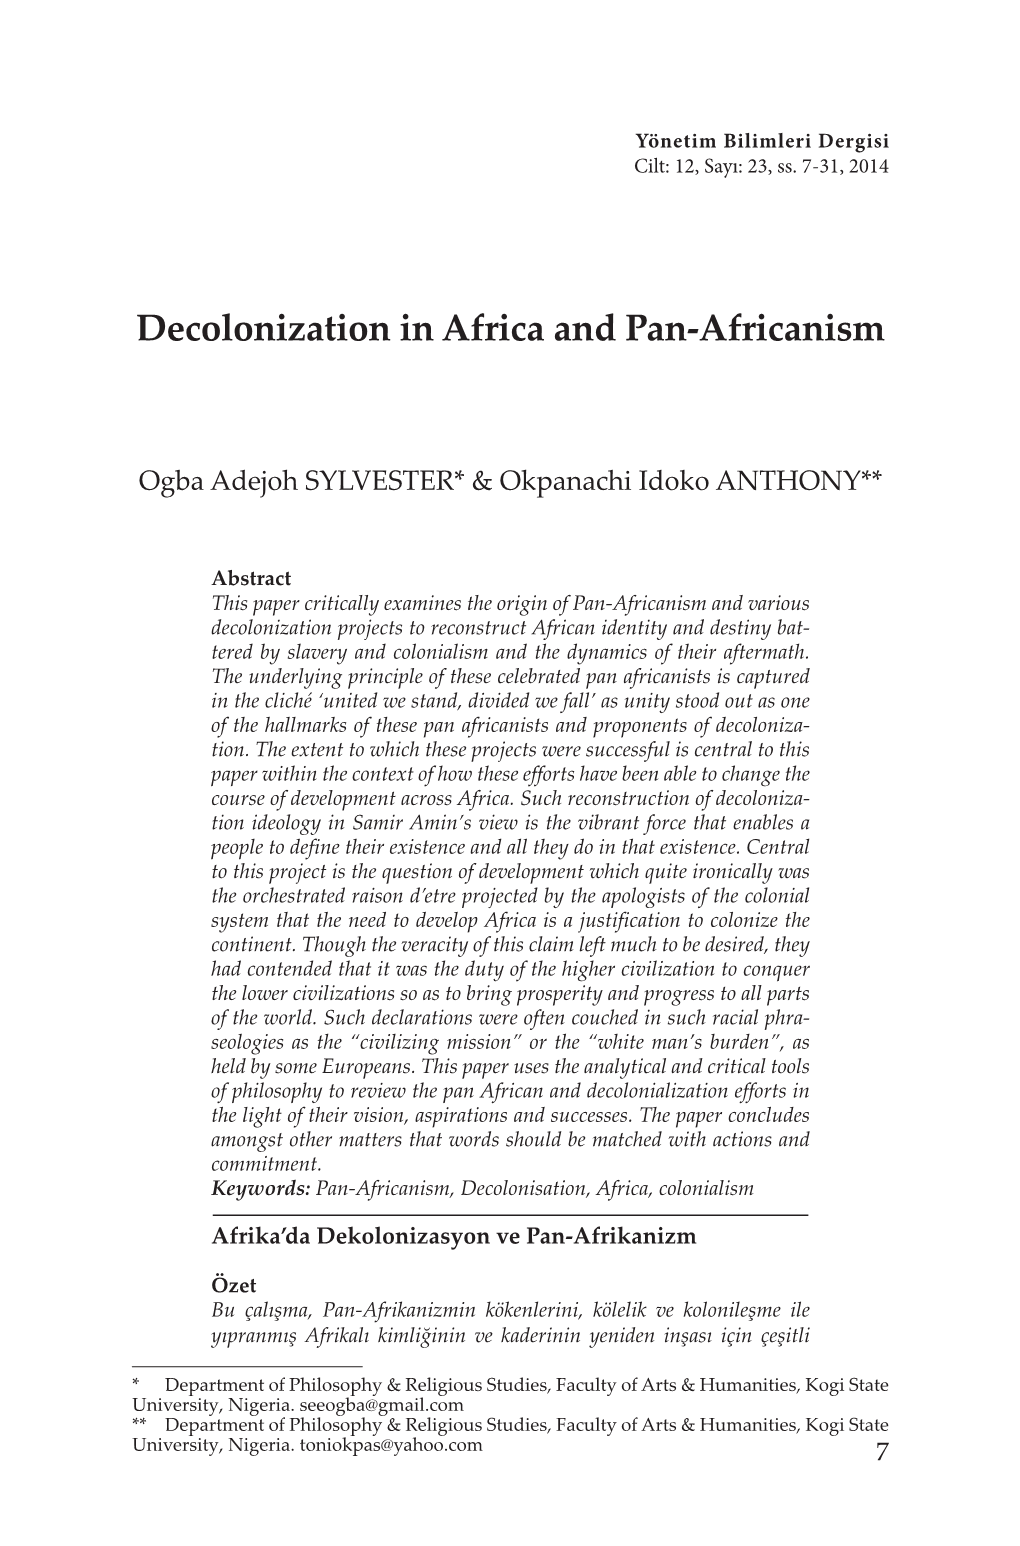 Decolonization in Africa and Pan-Africanism